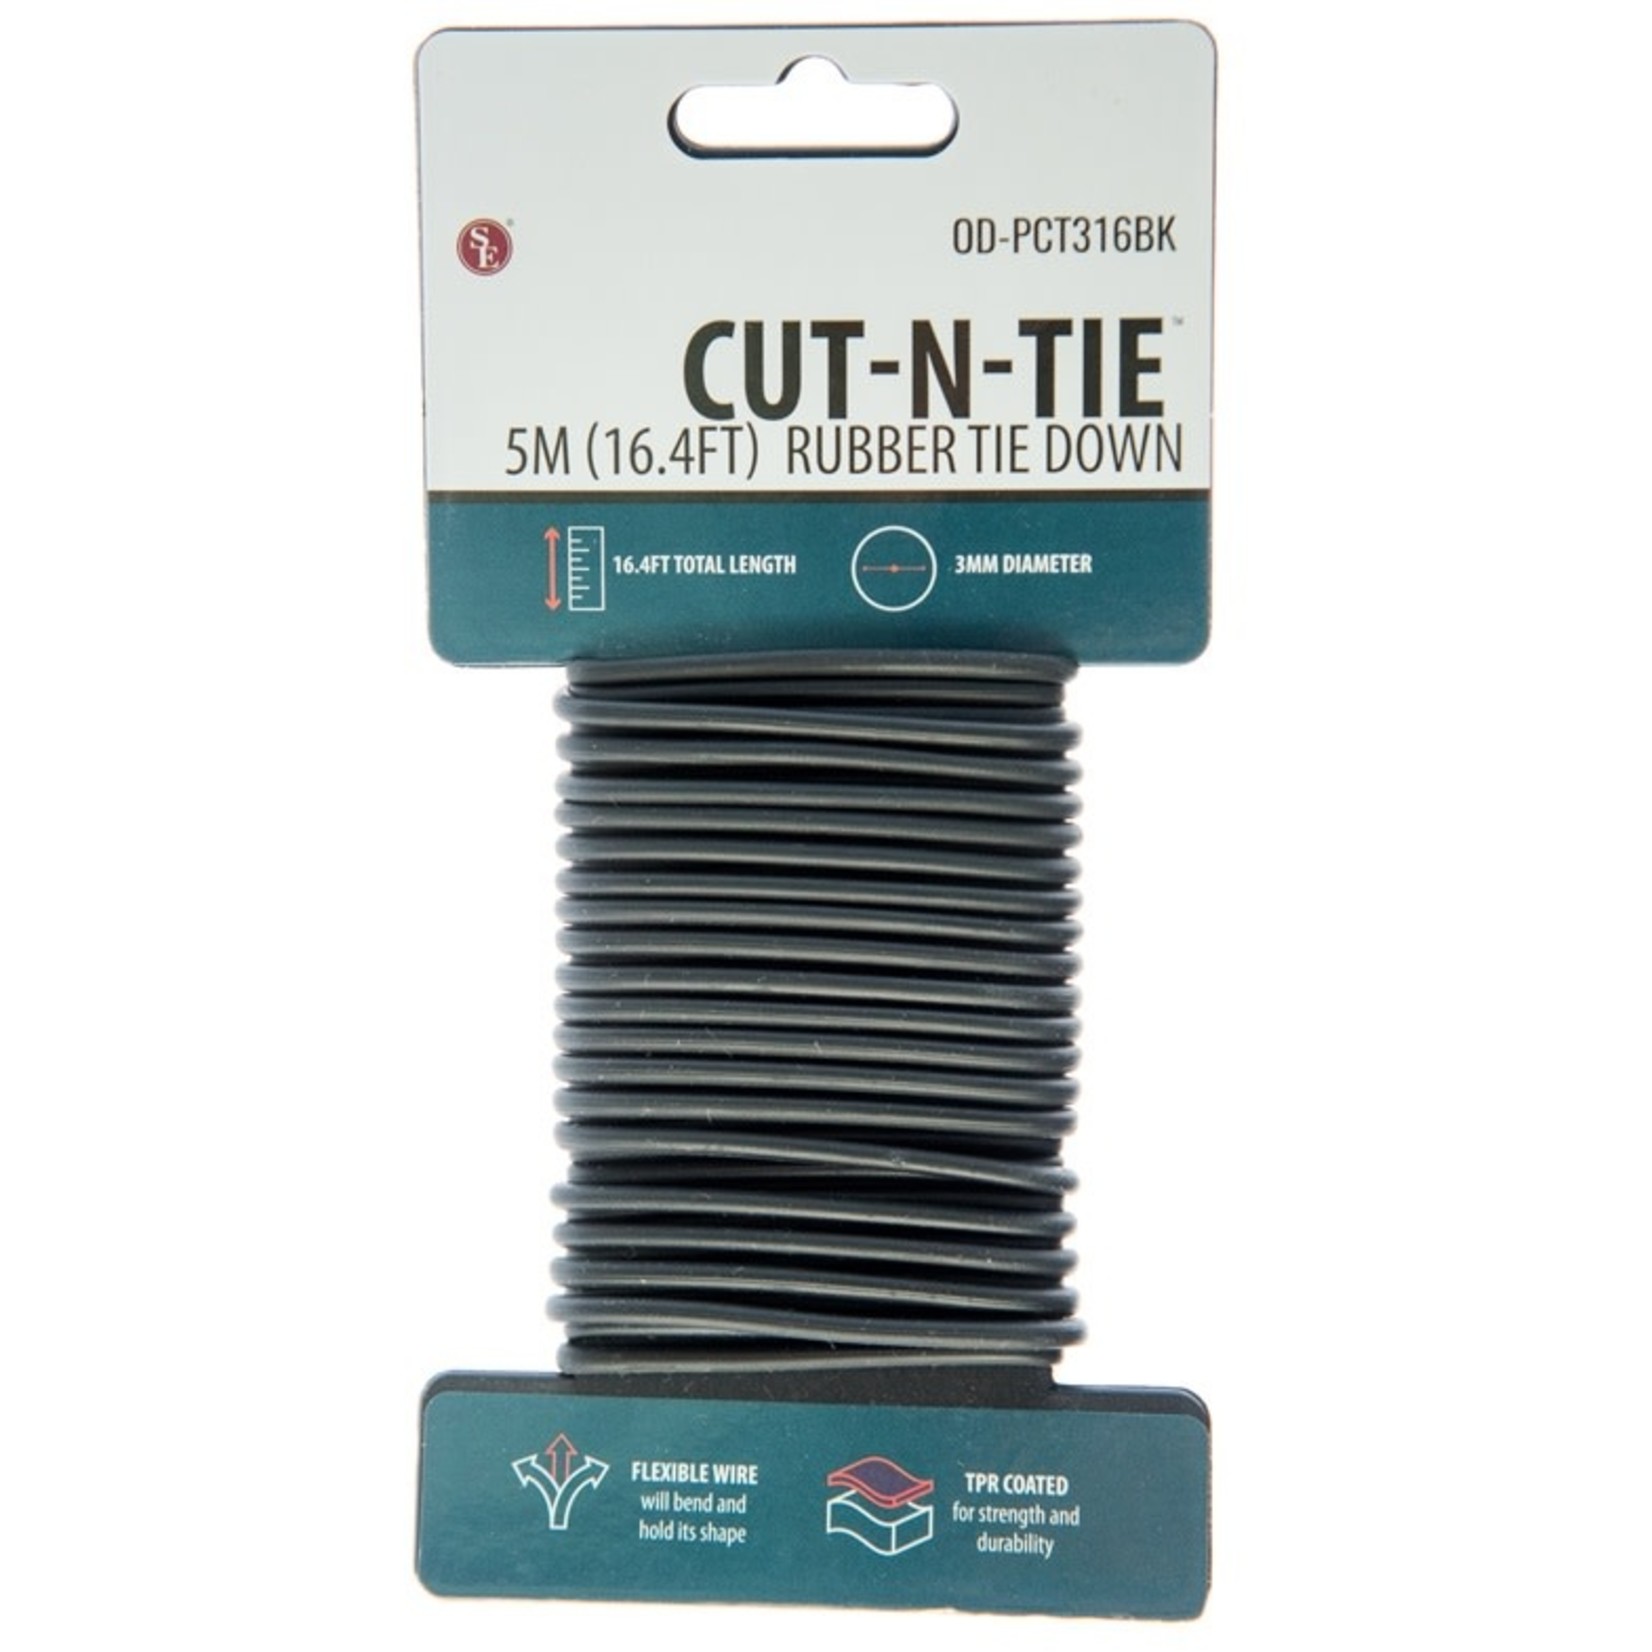 Sona SE Cut-N-Tie Rubber Tie Down - 3mm Thick